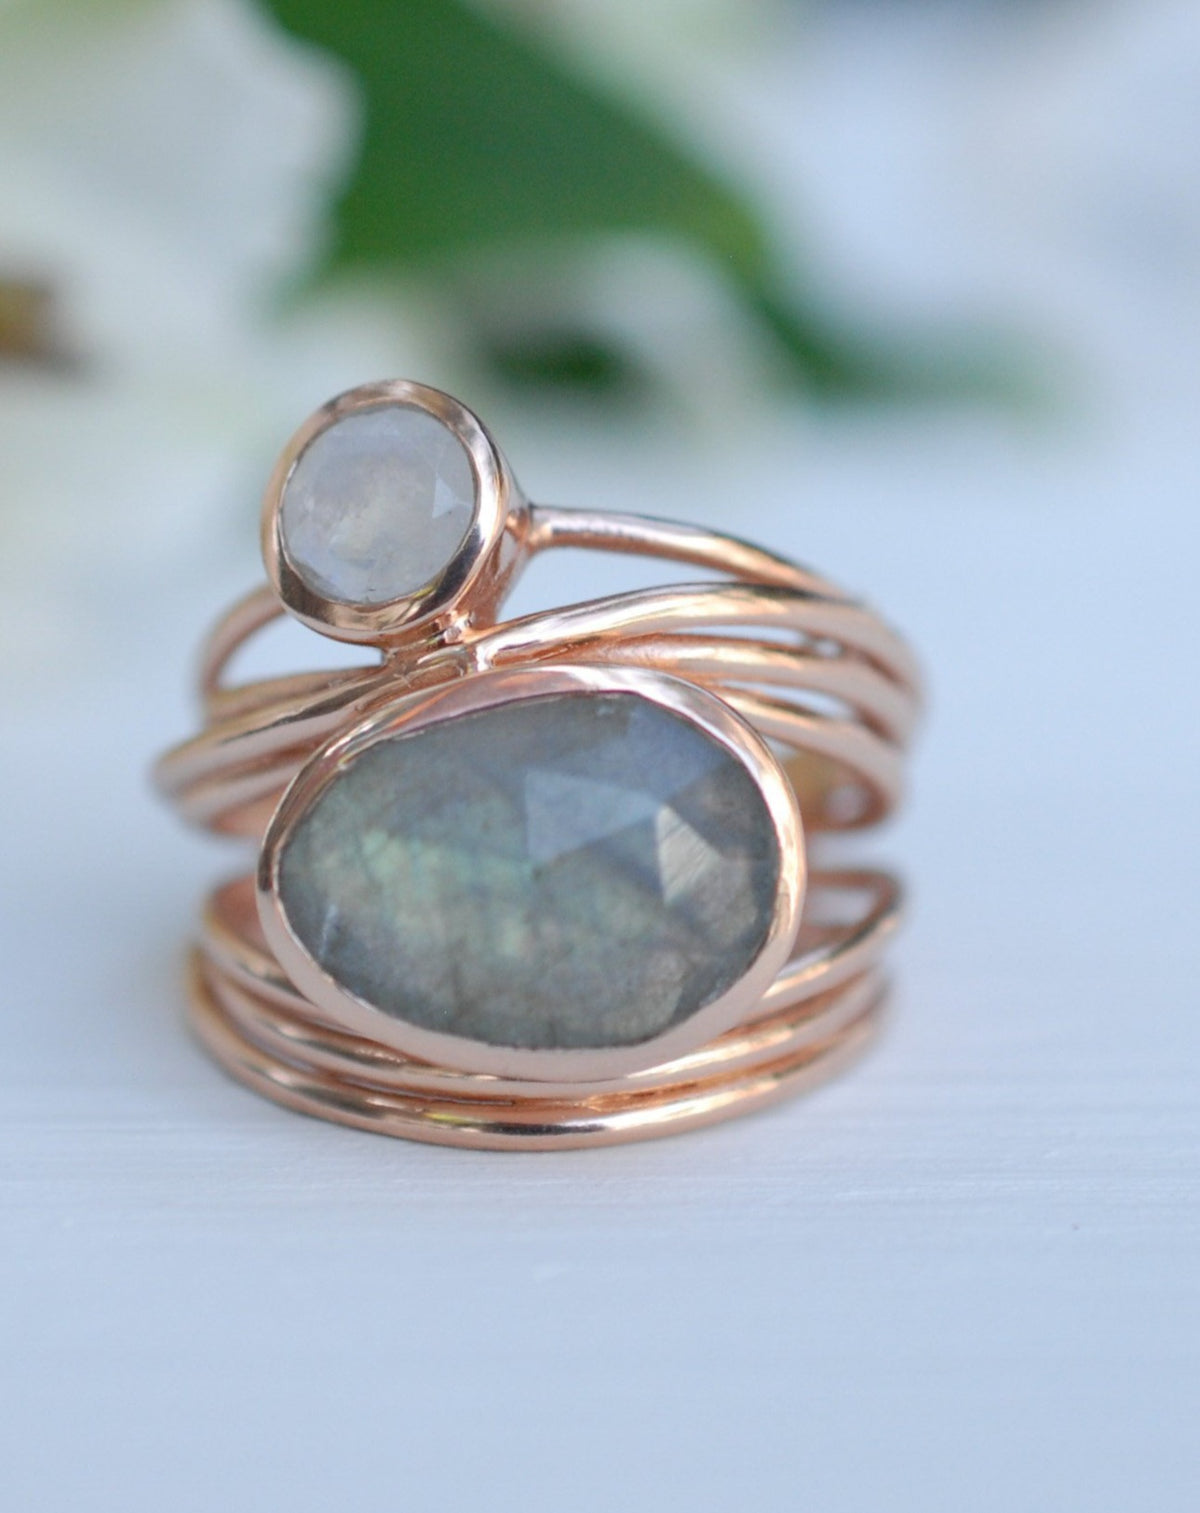 Rose Gold Plated  Ring* Labradorite * Moonstone * Gemstones * Handmade *Statement * Natural * Organic * Gift for her * Jewelry*Bycila*BJR075